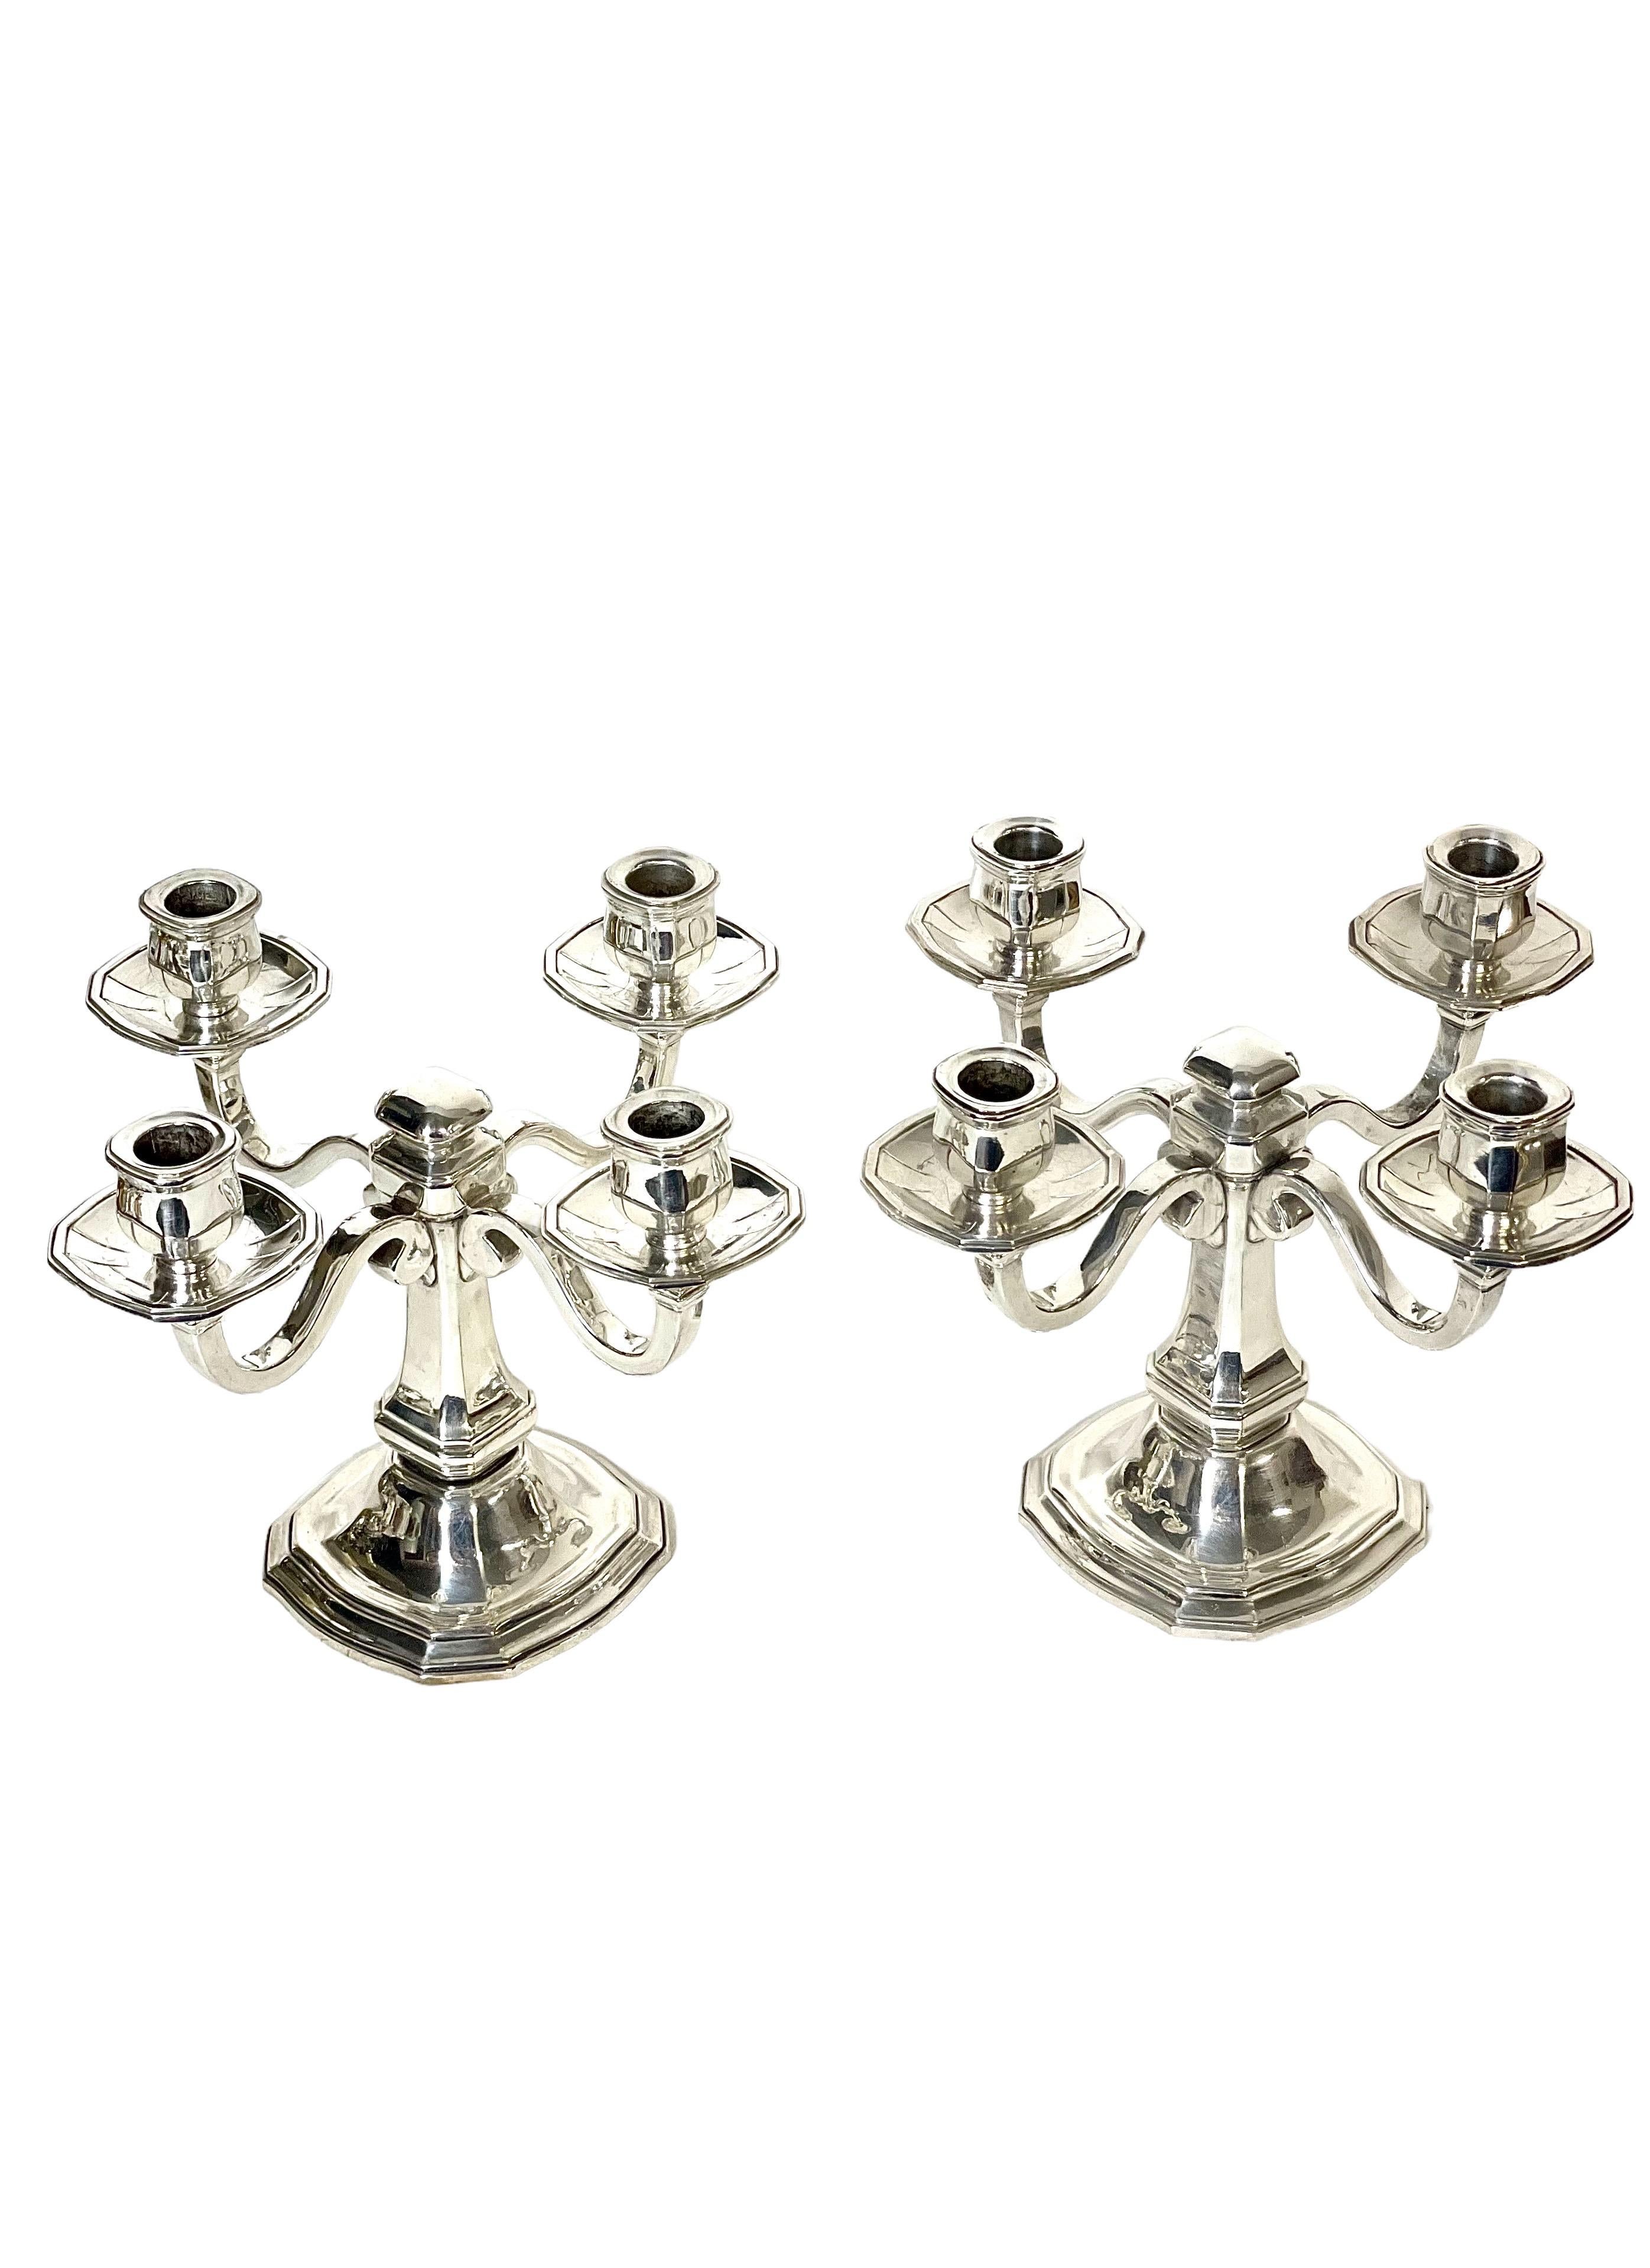 An exceptionally fine and matching pair of Louis XIV style four-light candelabra, in gleaming, silver-plated bronze. These striking candle holders are raised on tiered, octagonal bases, their square-sided central pillars rising to meet the four